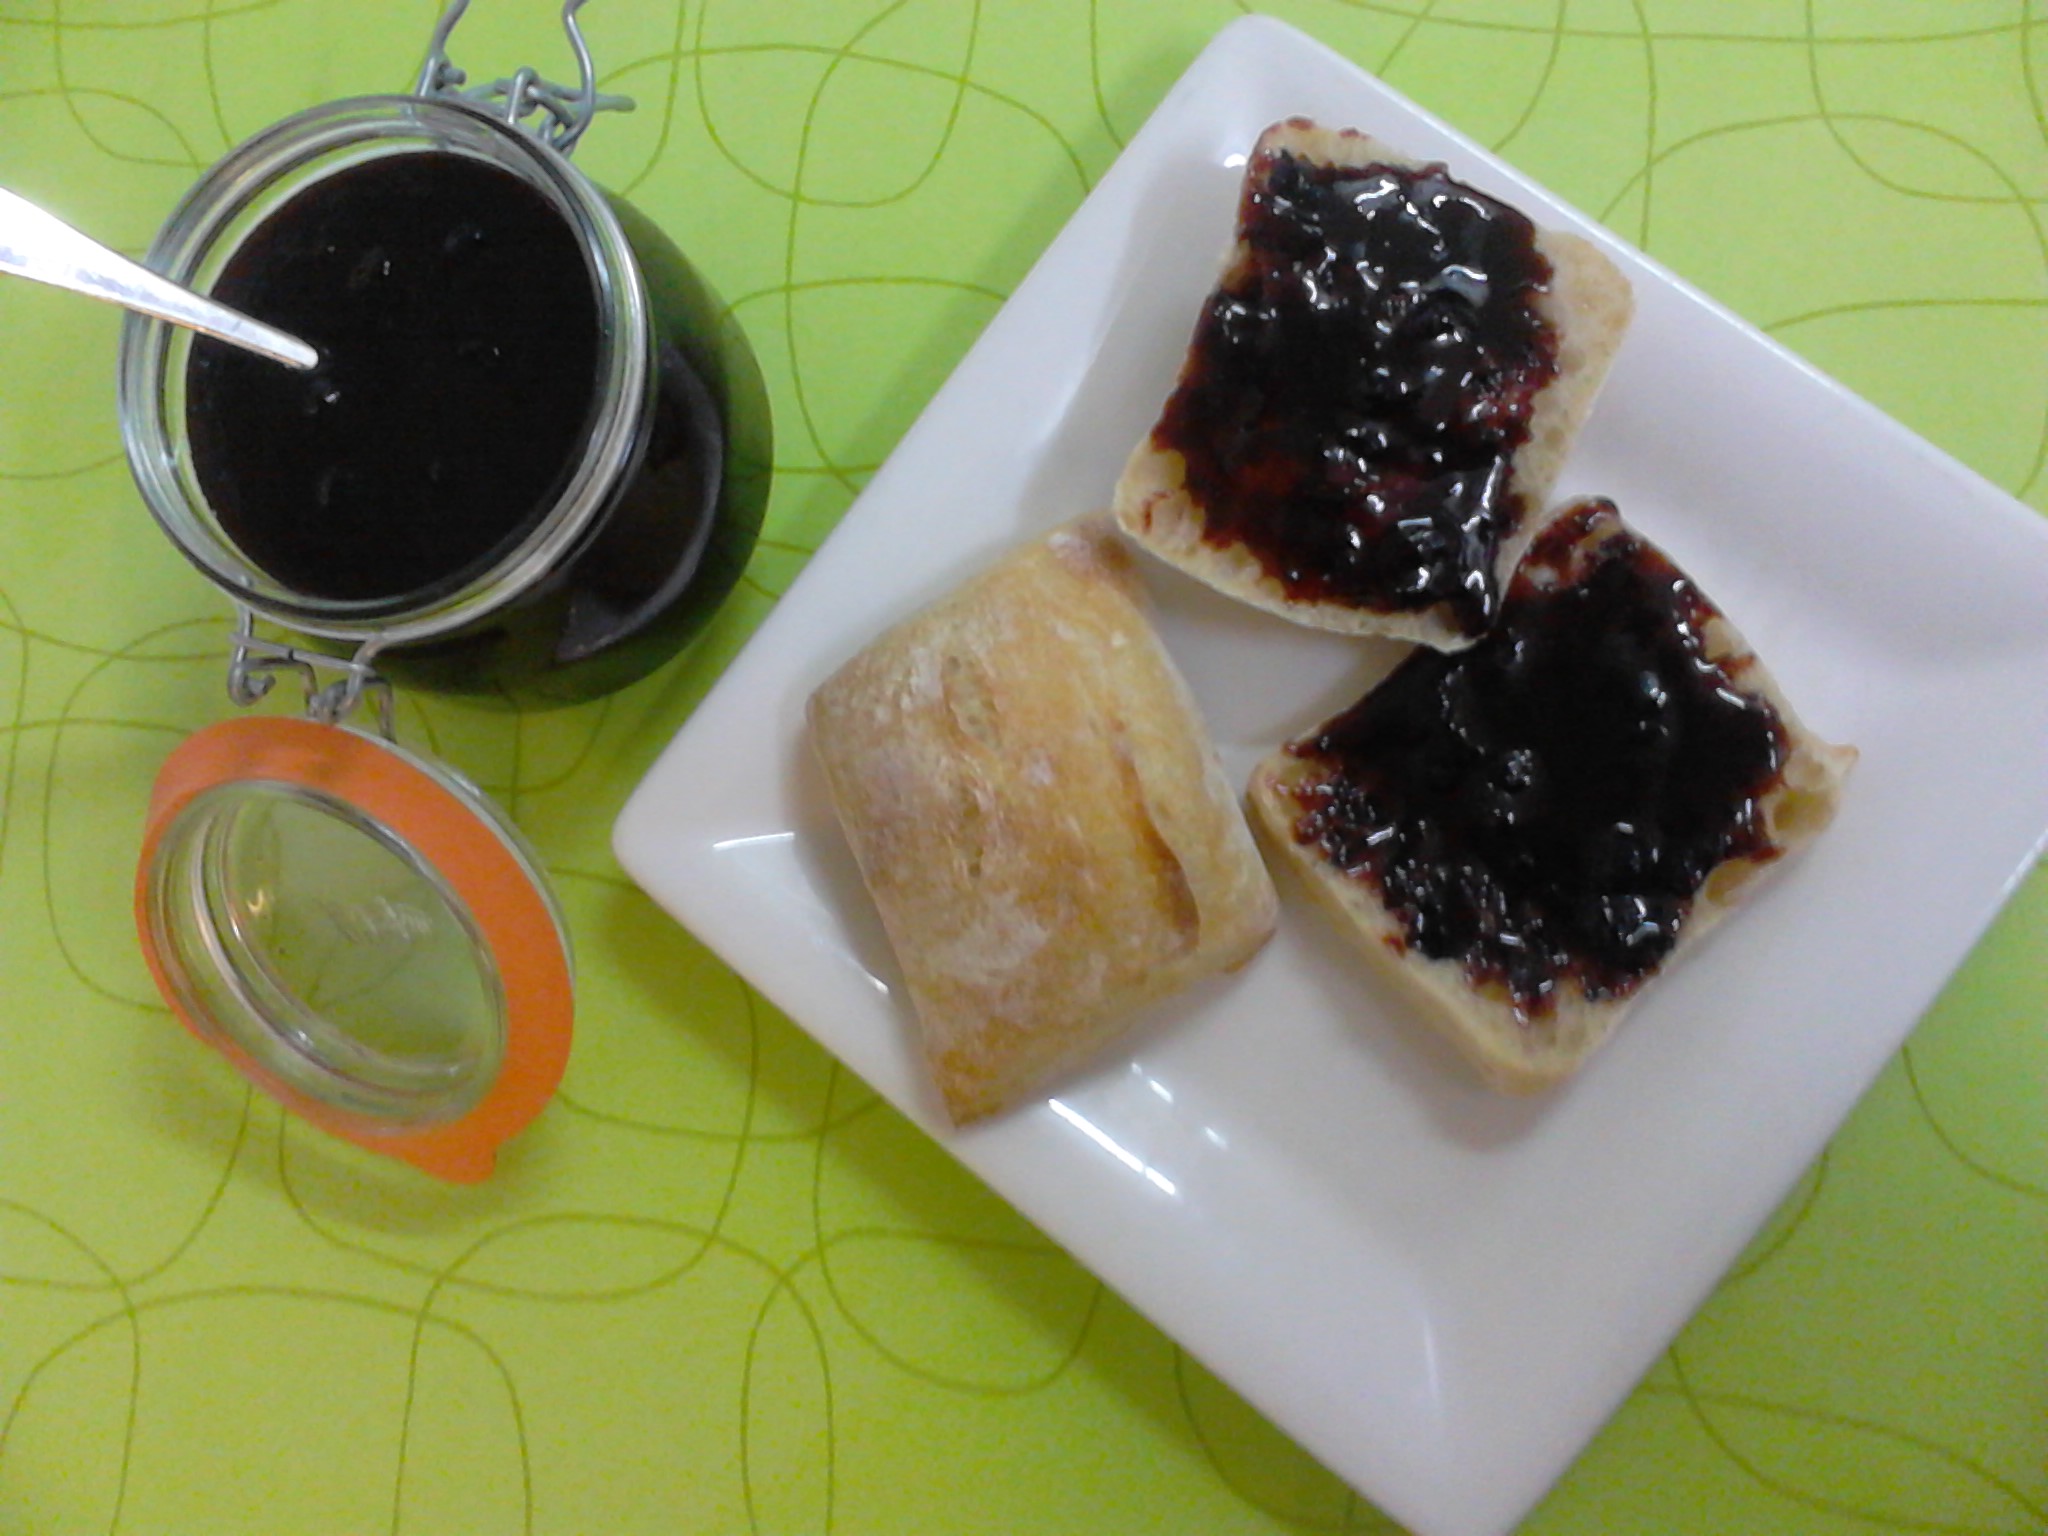 plate with two slices of bread spread with blackcurrant and wine jam, and a glass of blackcurrant and wine jam beside the plate